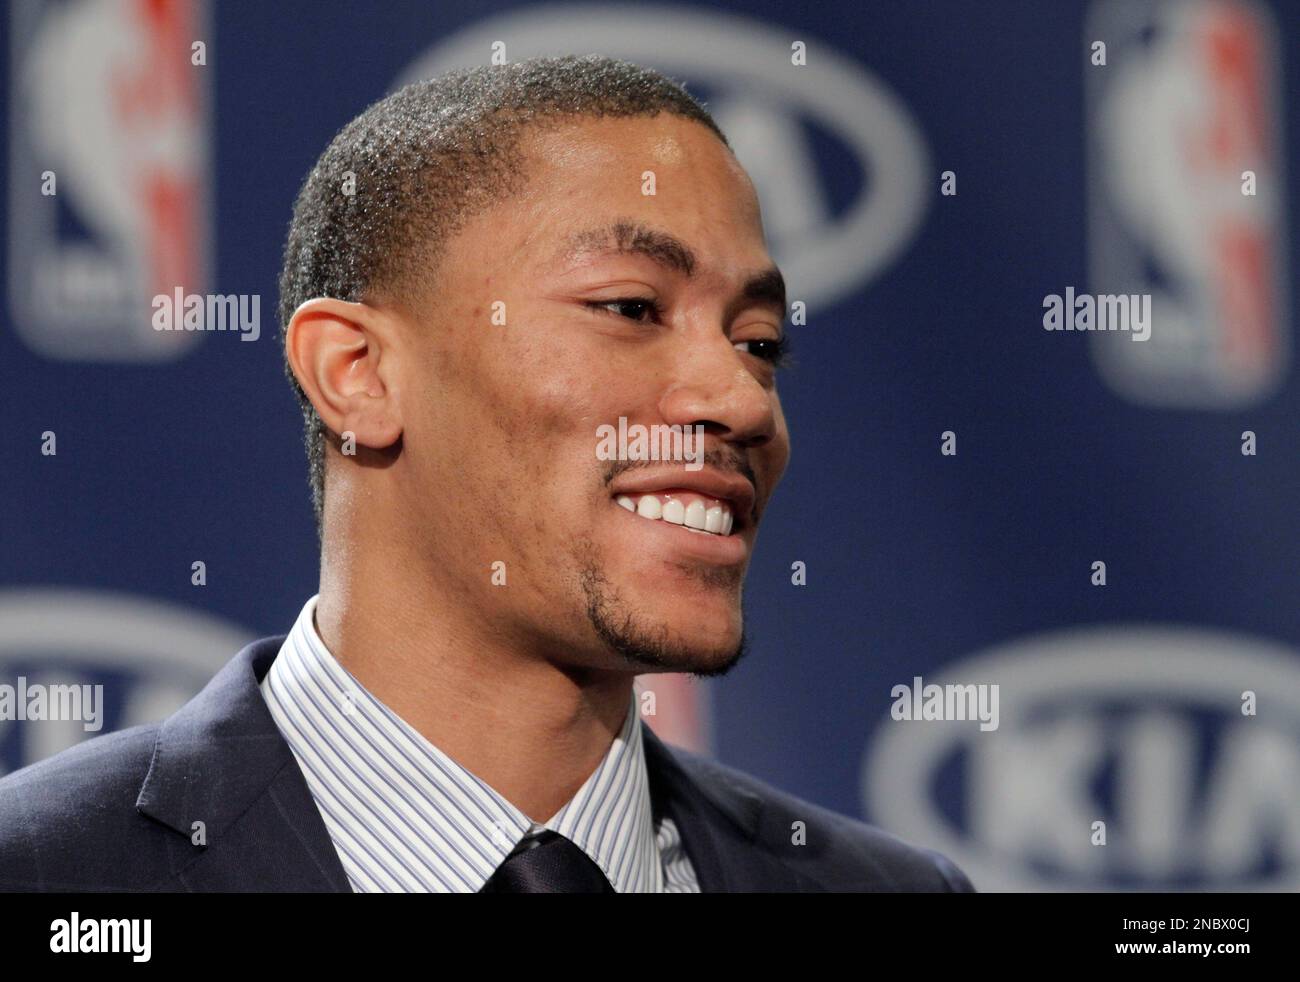 NBA Buzz - Derrick Rose in his Cleveland Cavaliers